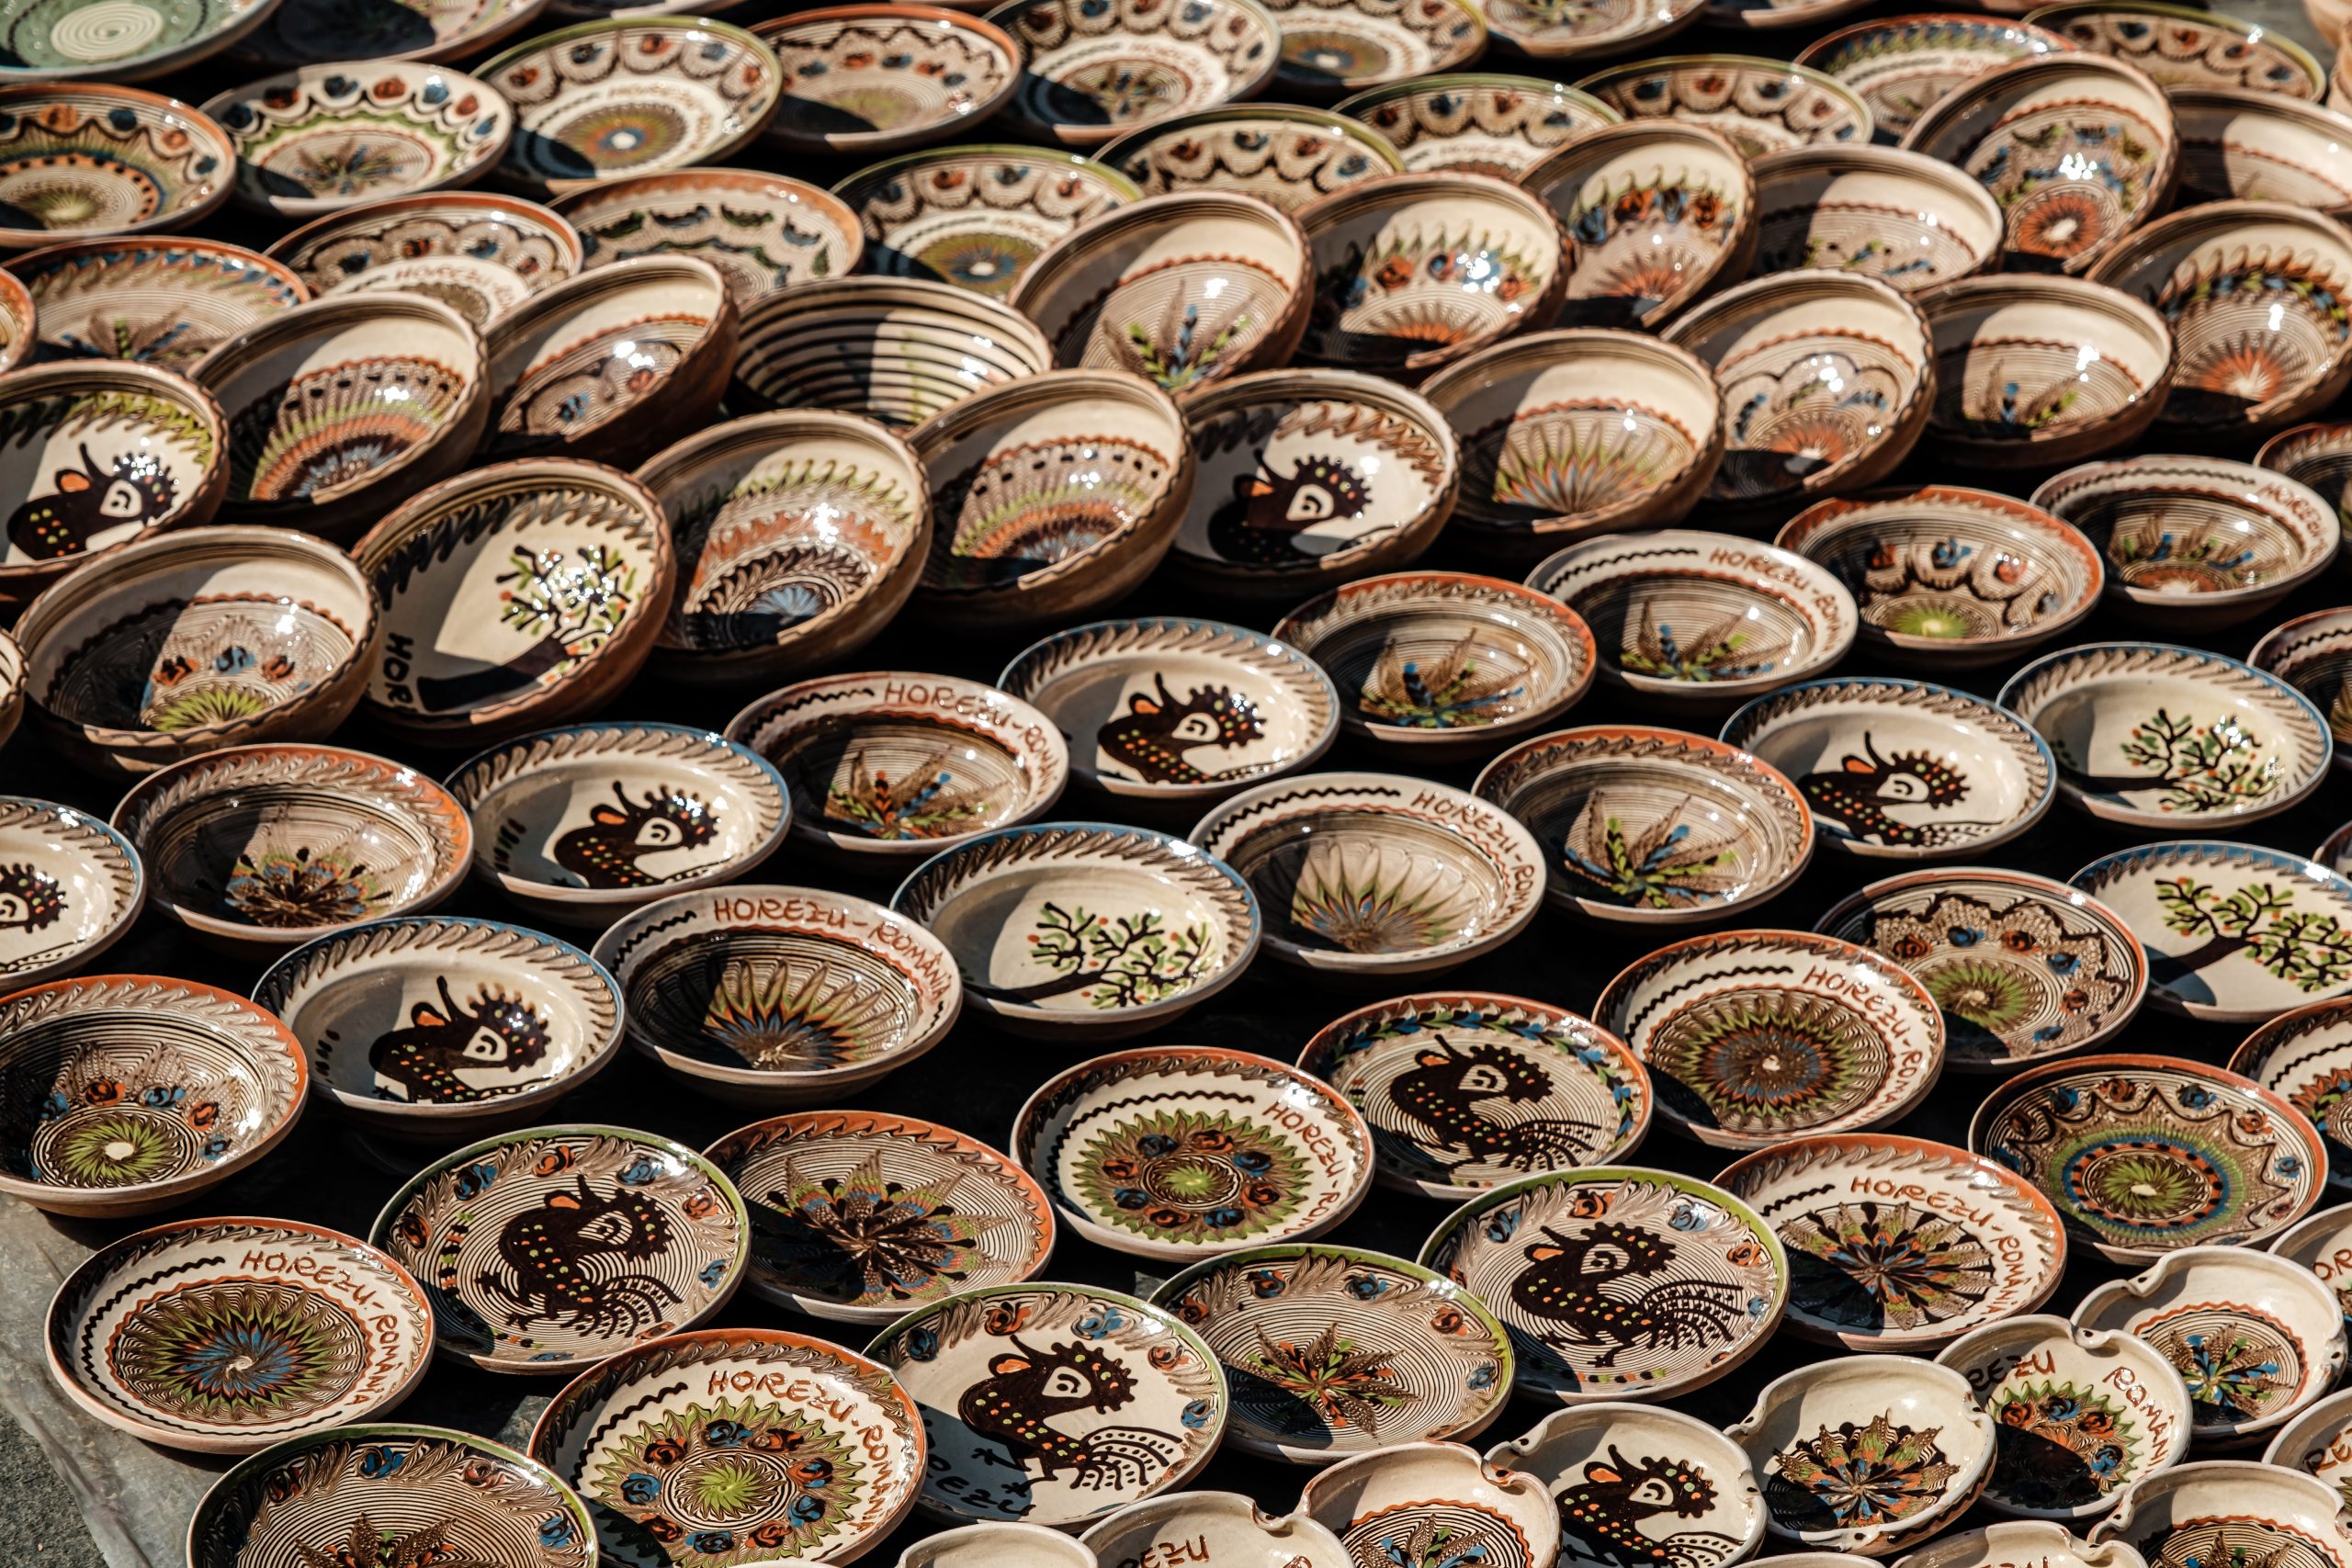 Horenzu ceramics are authentic and traditional and make for a perfect gift from Romania